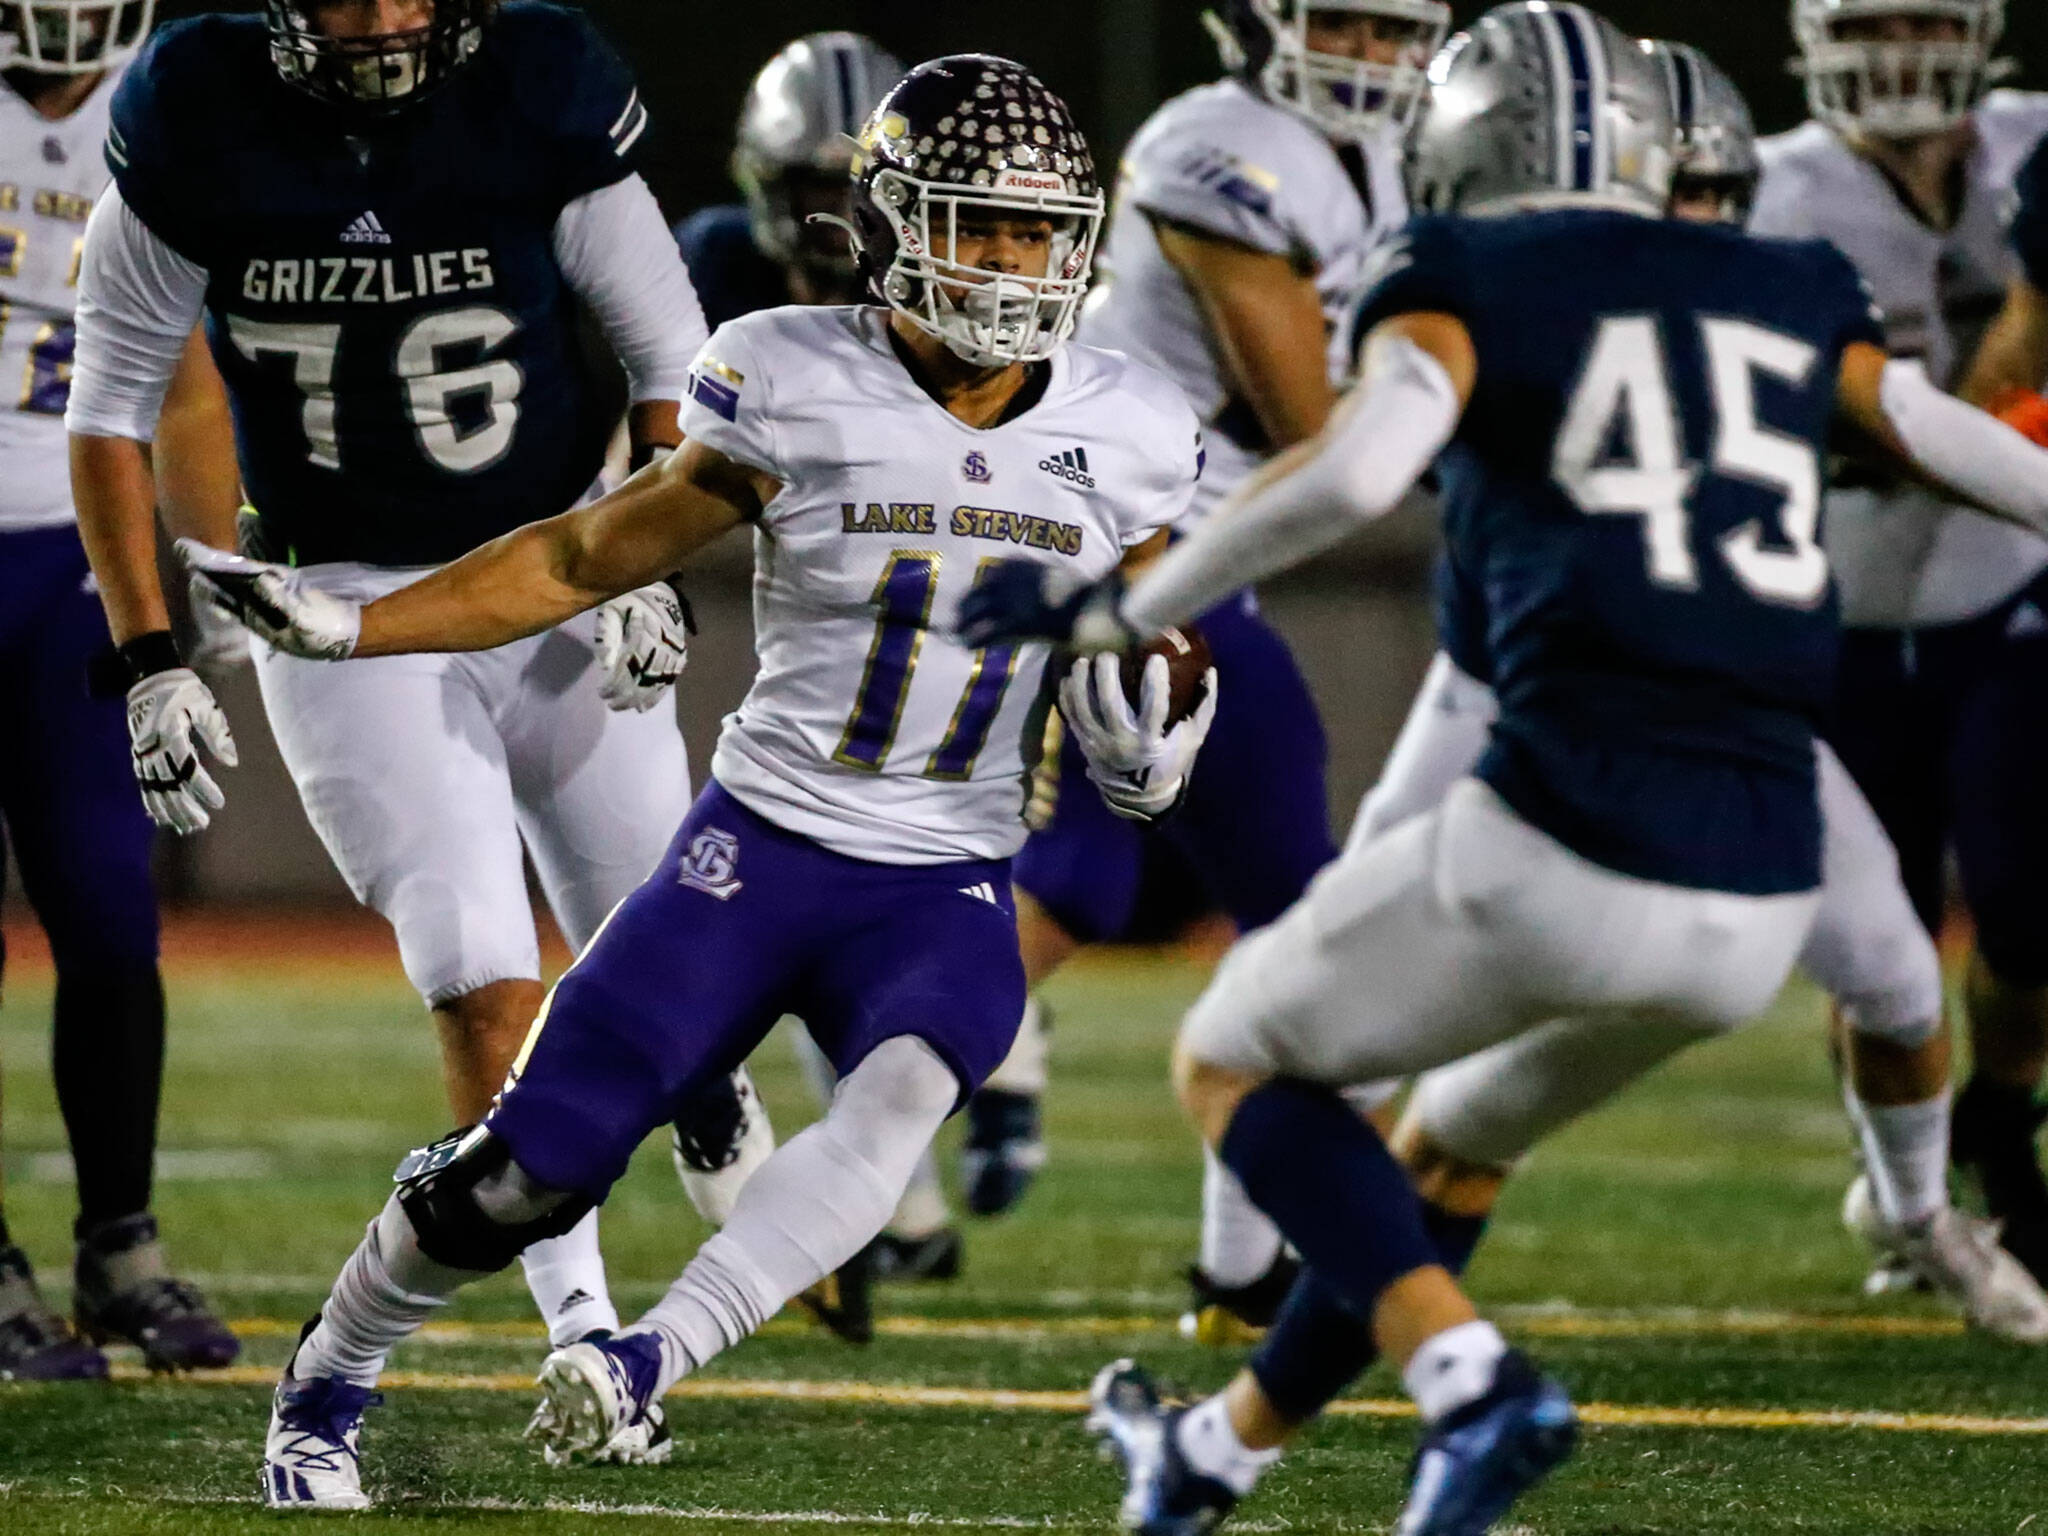 Lake Stevens’ Jayden Limar runs with the ball during a game against Glacier Peak at Veterans Memorial Stadium in Snohomish on Oct. 29, 2021. (Kevin Clark / The Herald)